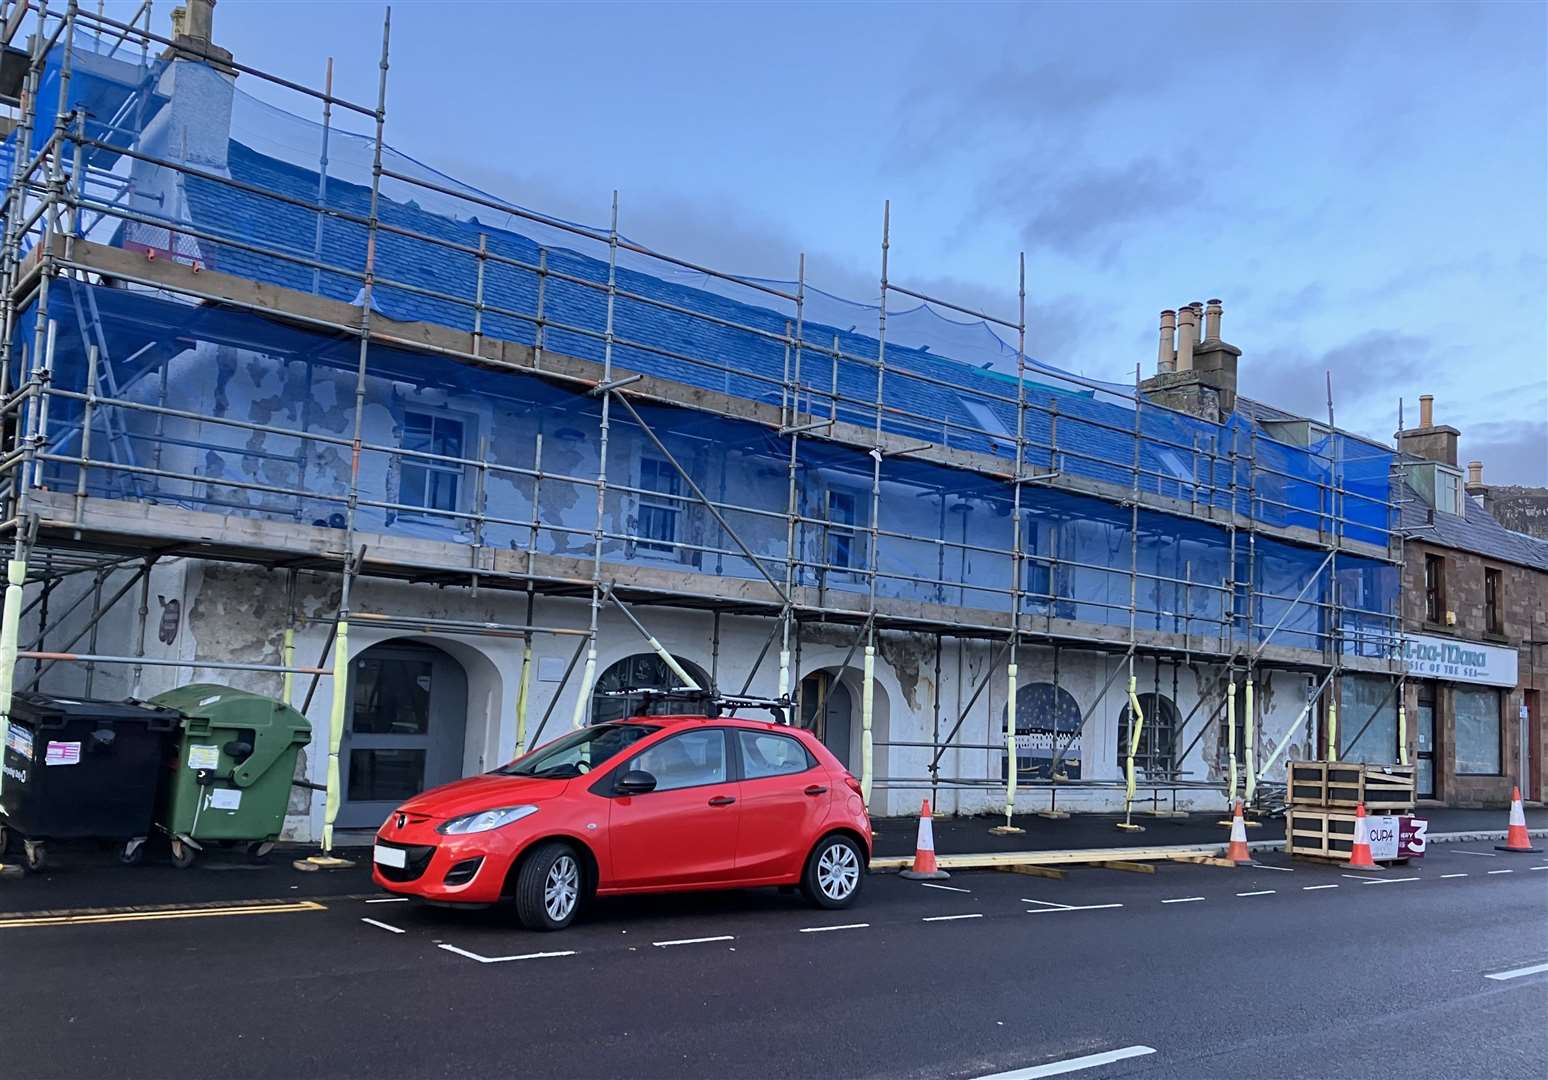 The old Frigate Bar and Bistro building being renovated into the new Rhidorroch Distillery Café and Bar, on Ullapool's Shore St, February 2024.